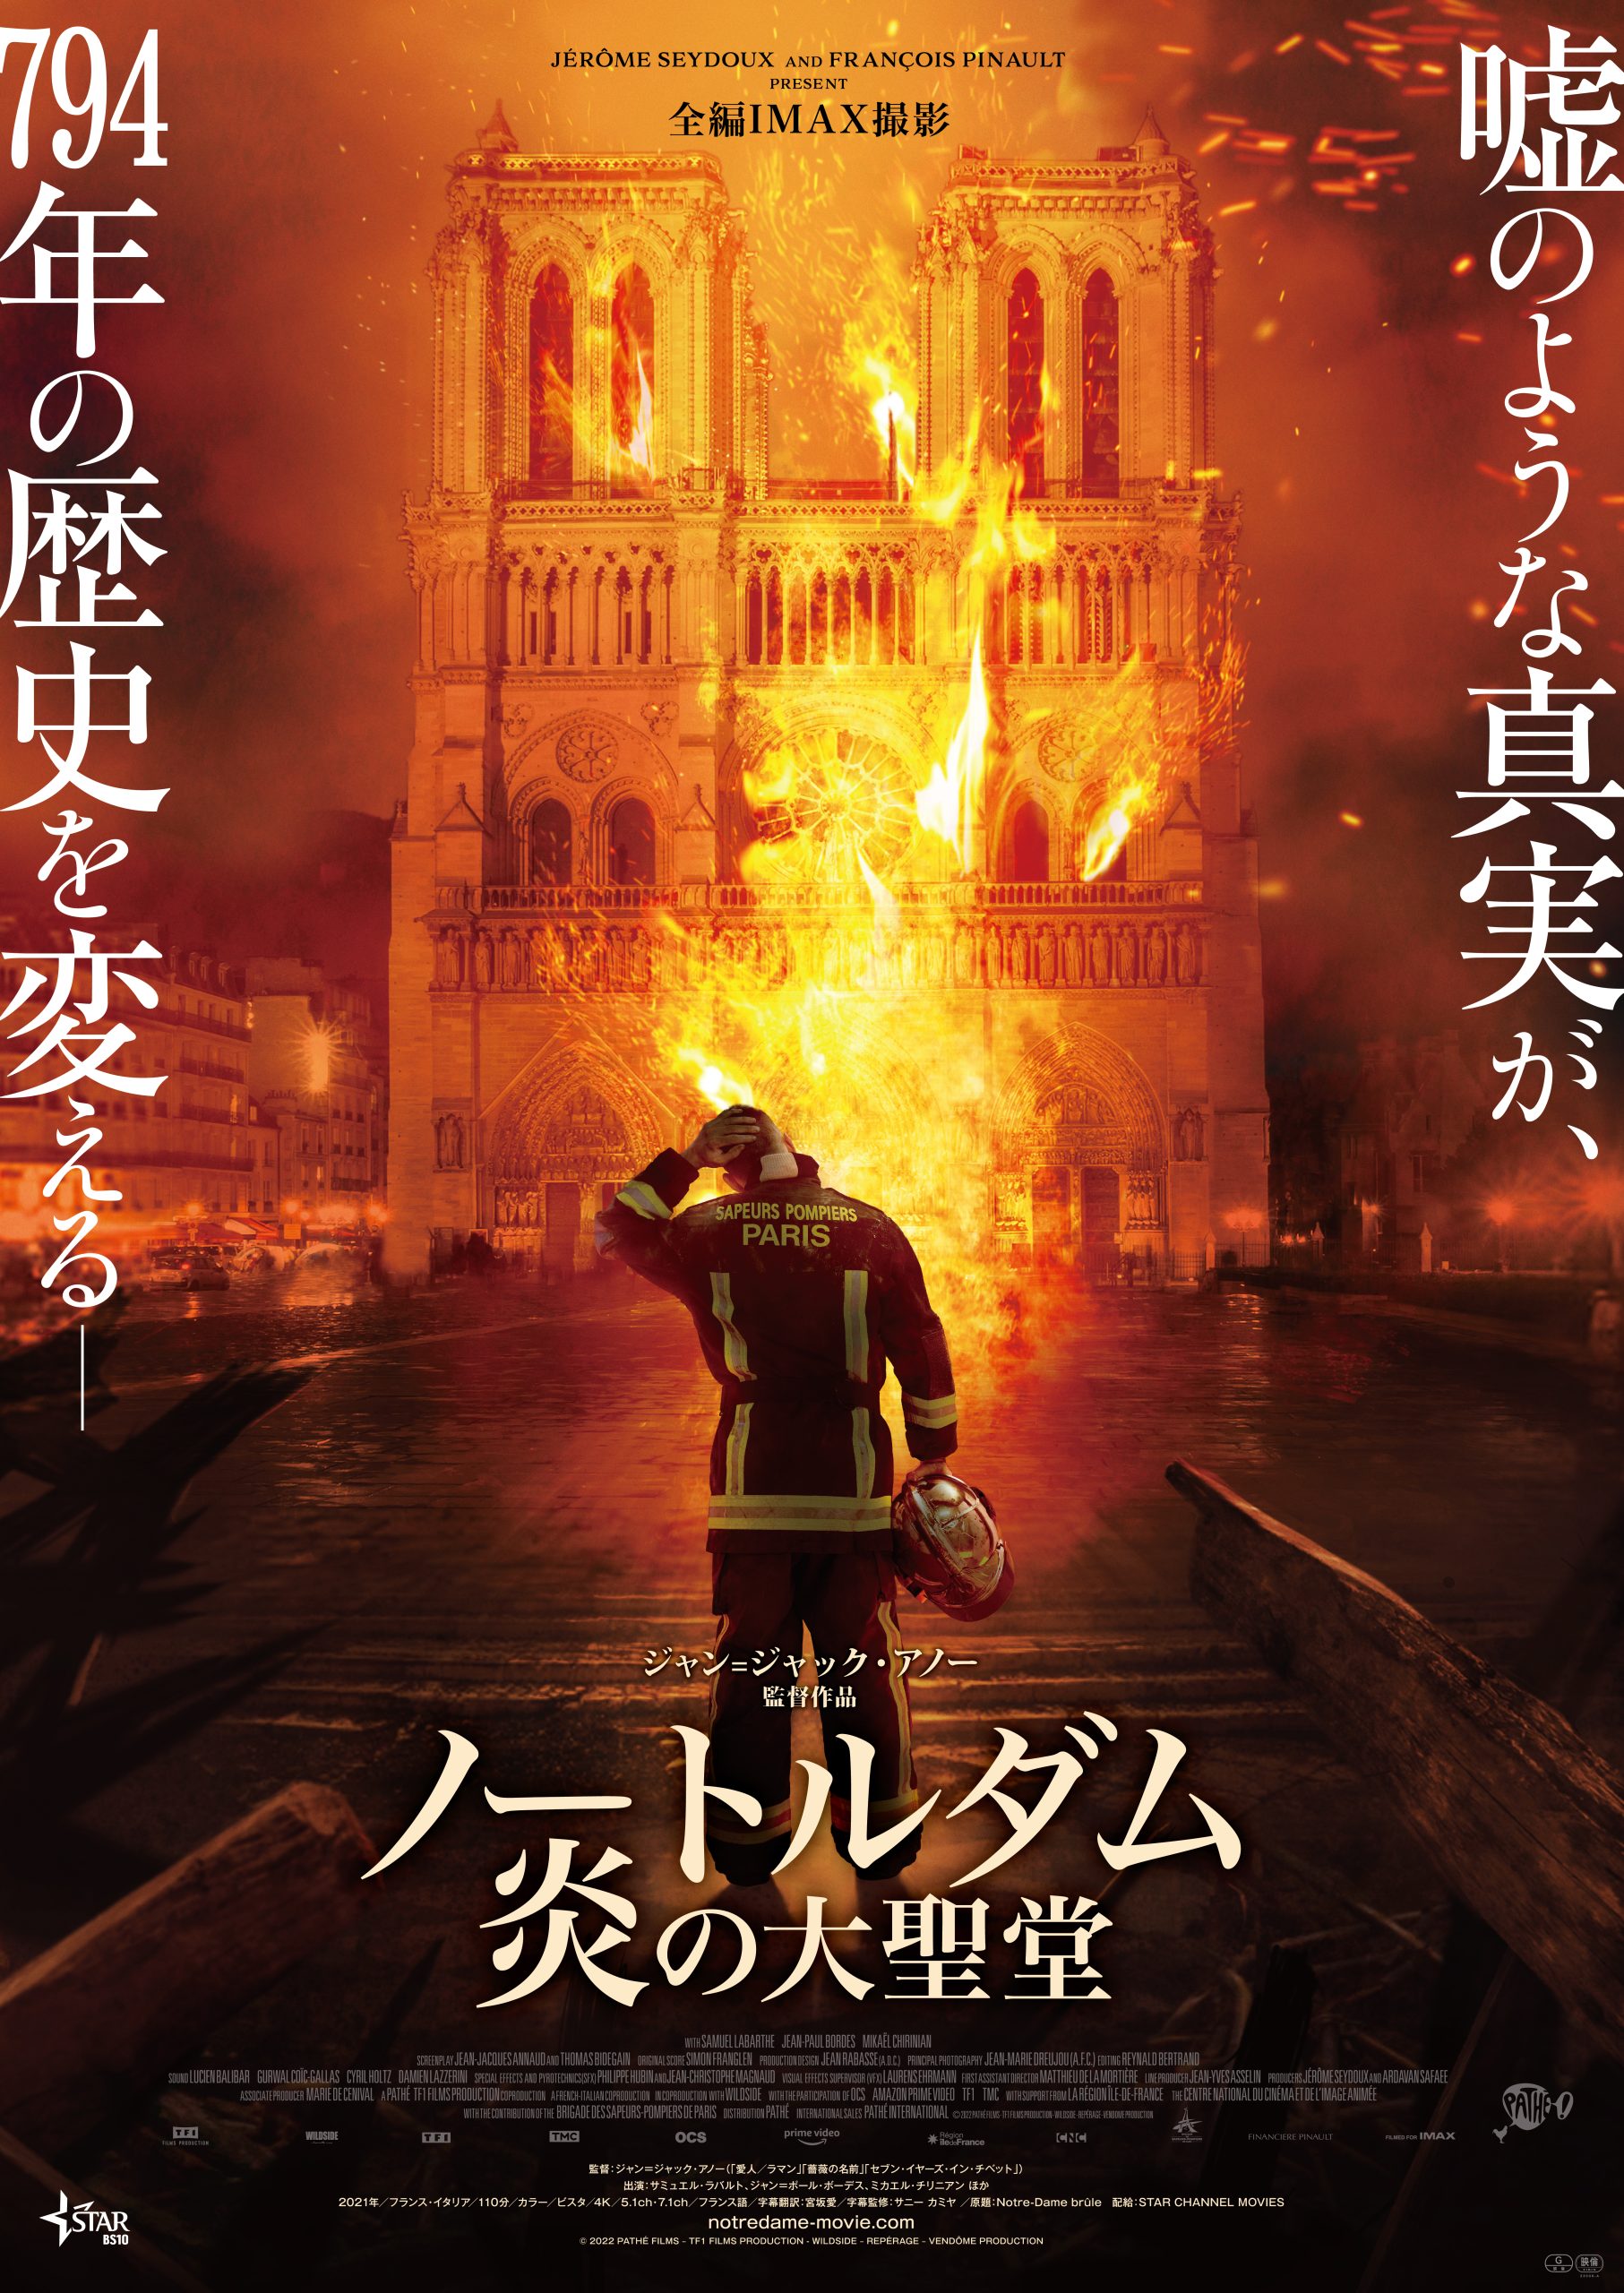 https://cineswitch.com/wp-content/uploads/2023/02/NOTREDAME_poster_B2-scaled.jpg